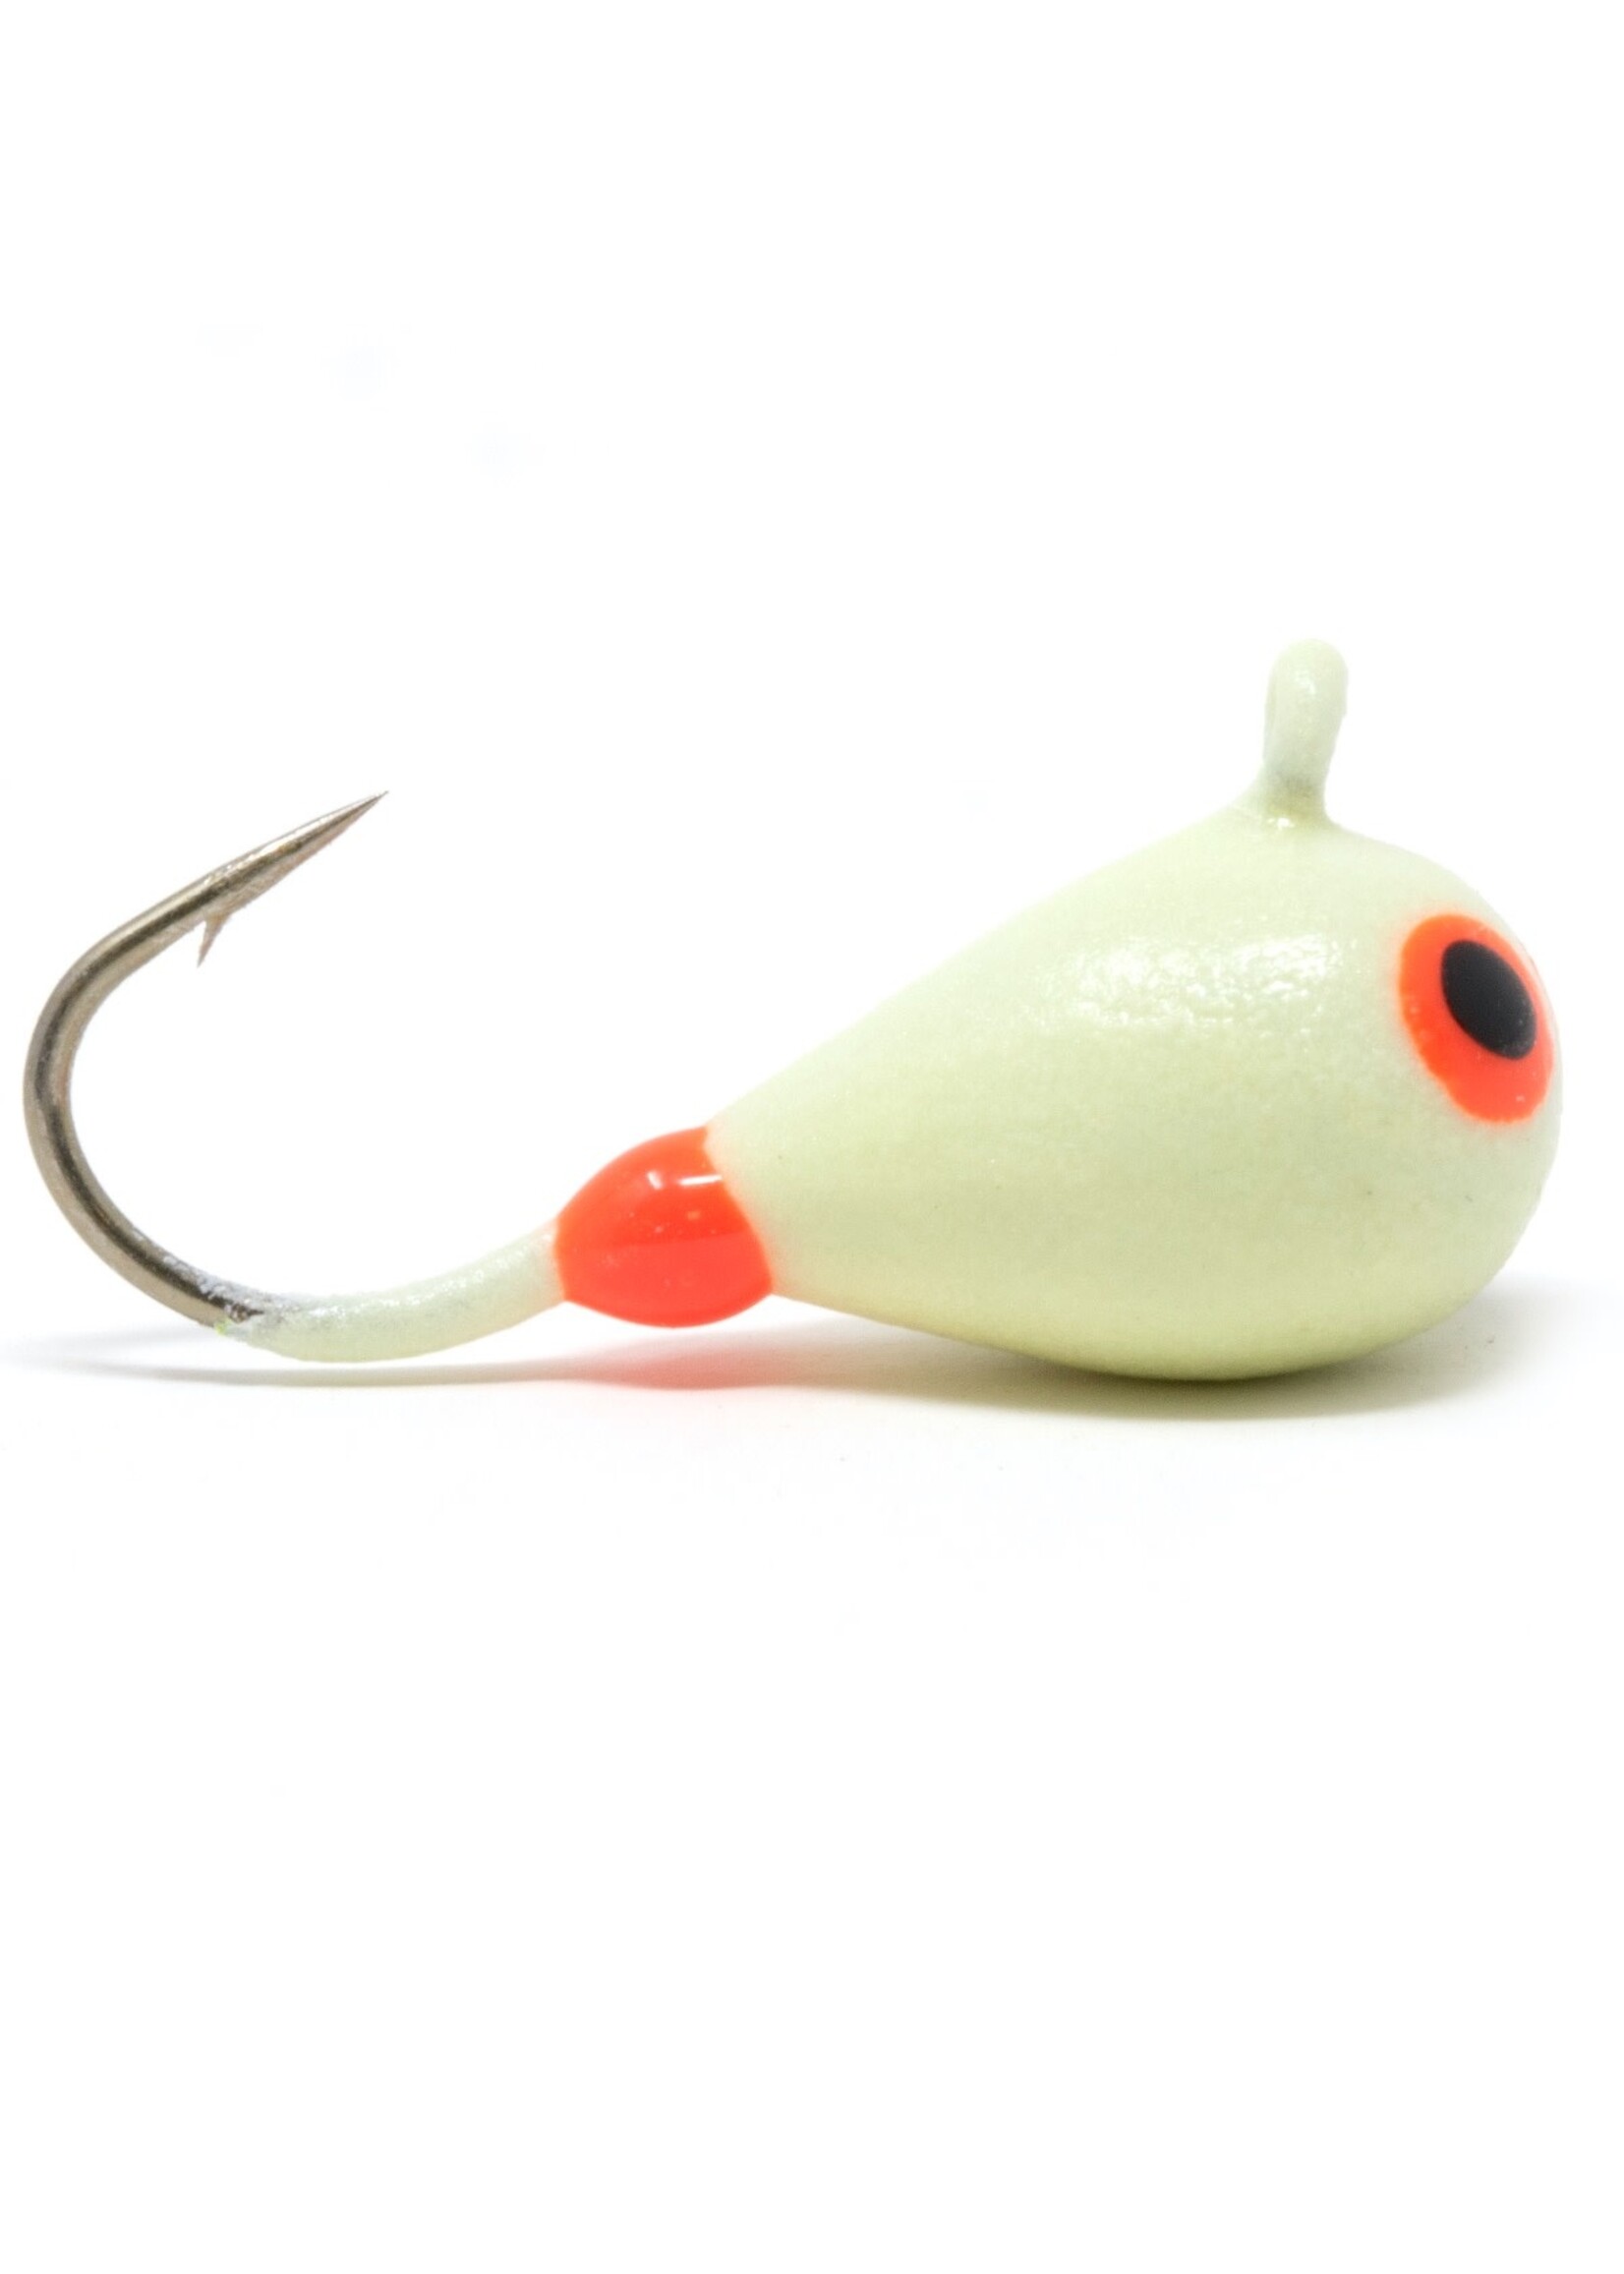 Clam Clam The Drop Tungsten Jig